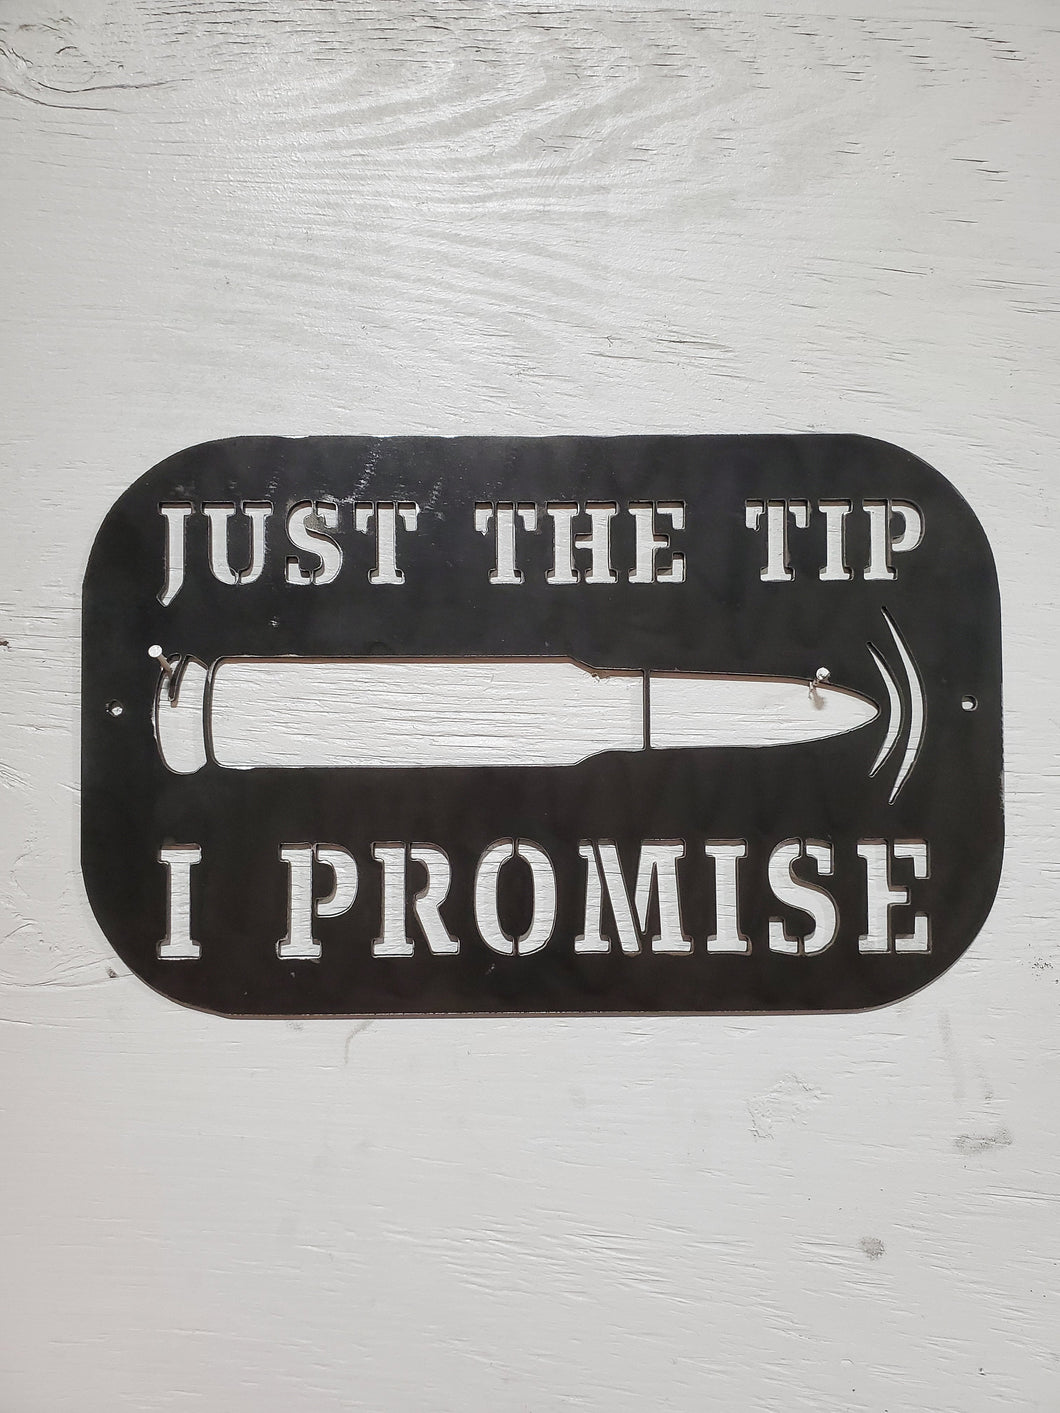 Just The Tip, I Promise metal CNC cut sign, 14ga steel. 16